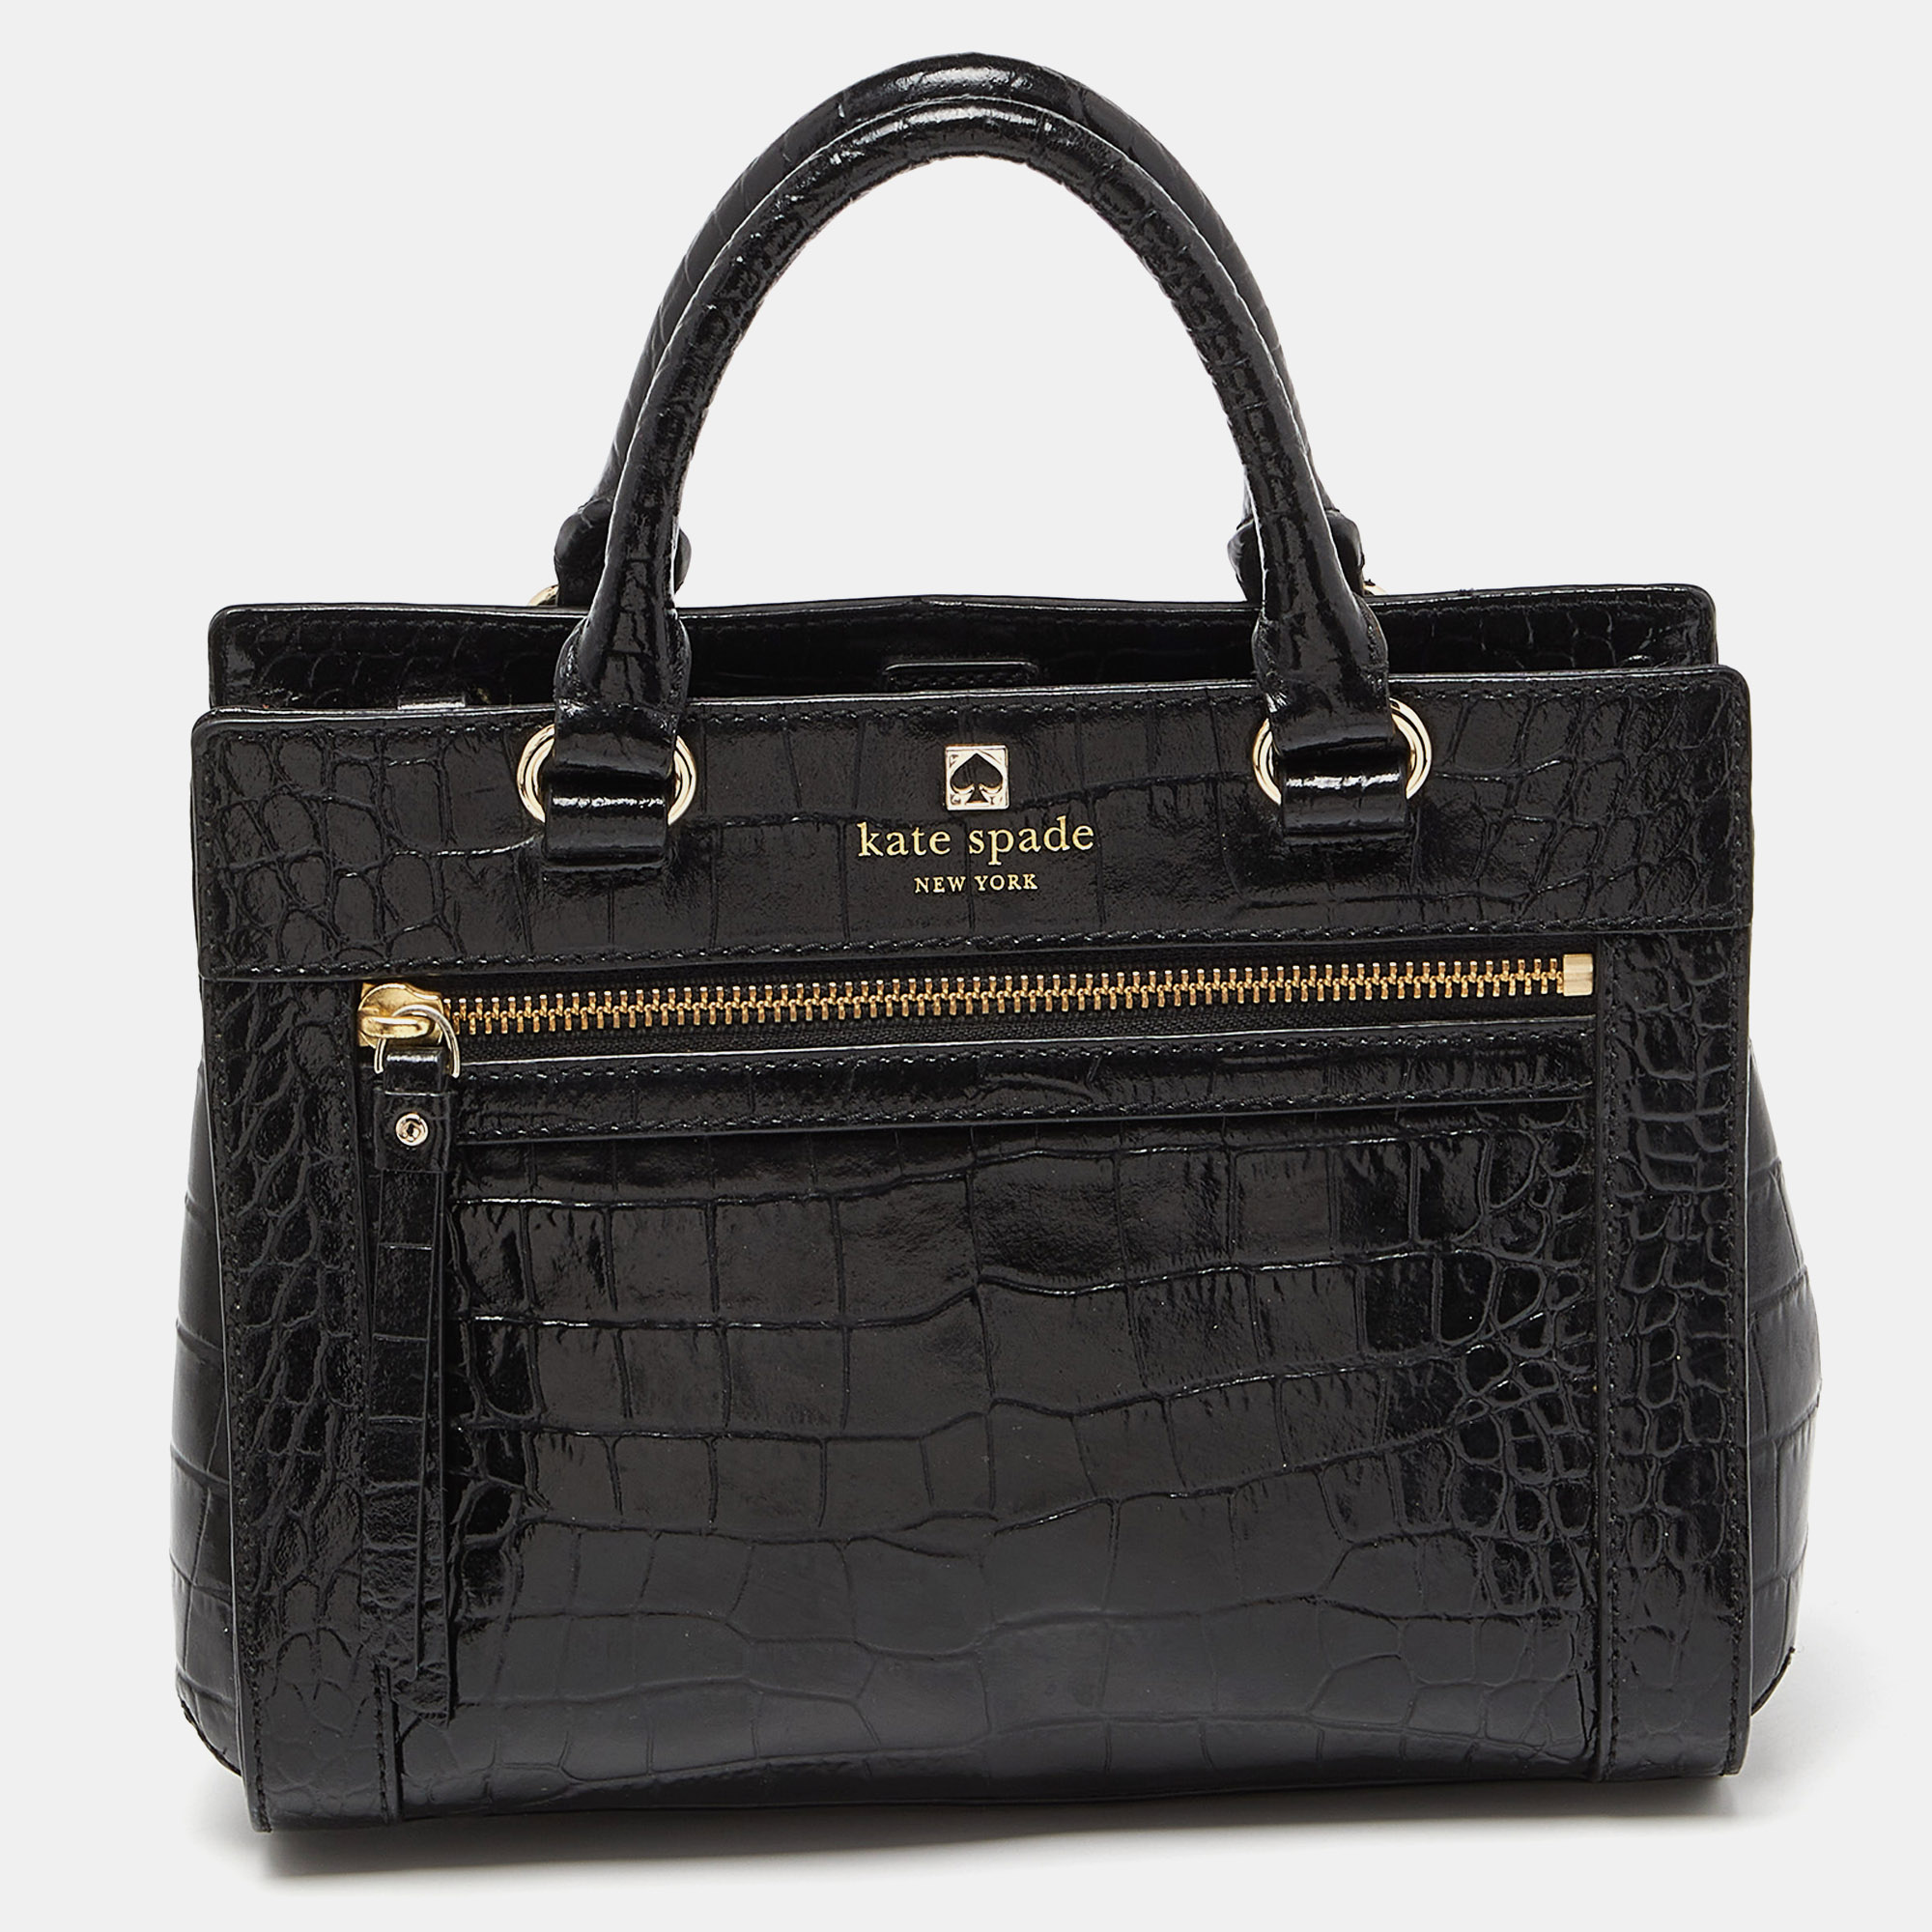 Pre-owned Kate Spade Black Croc Embossed Leather Tote